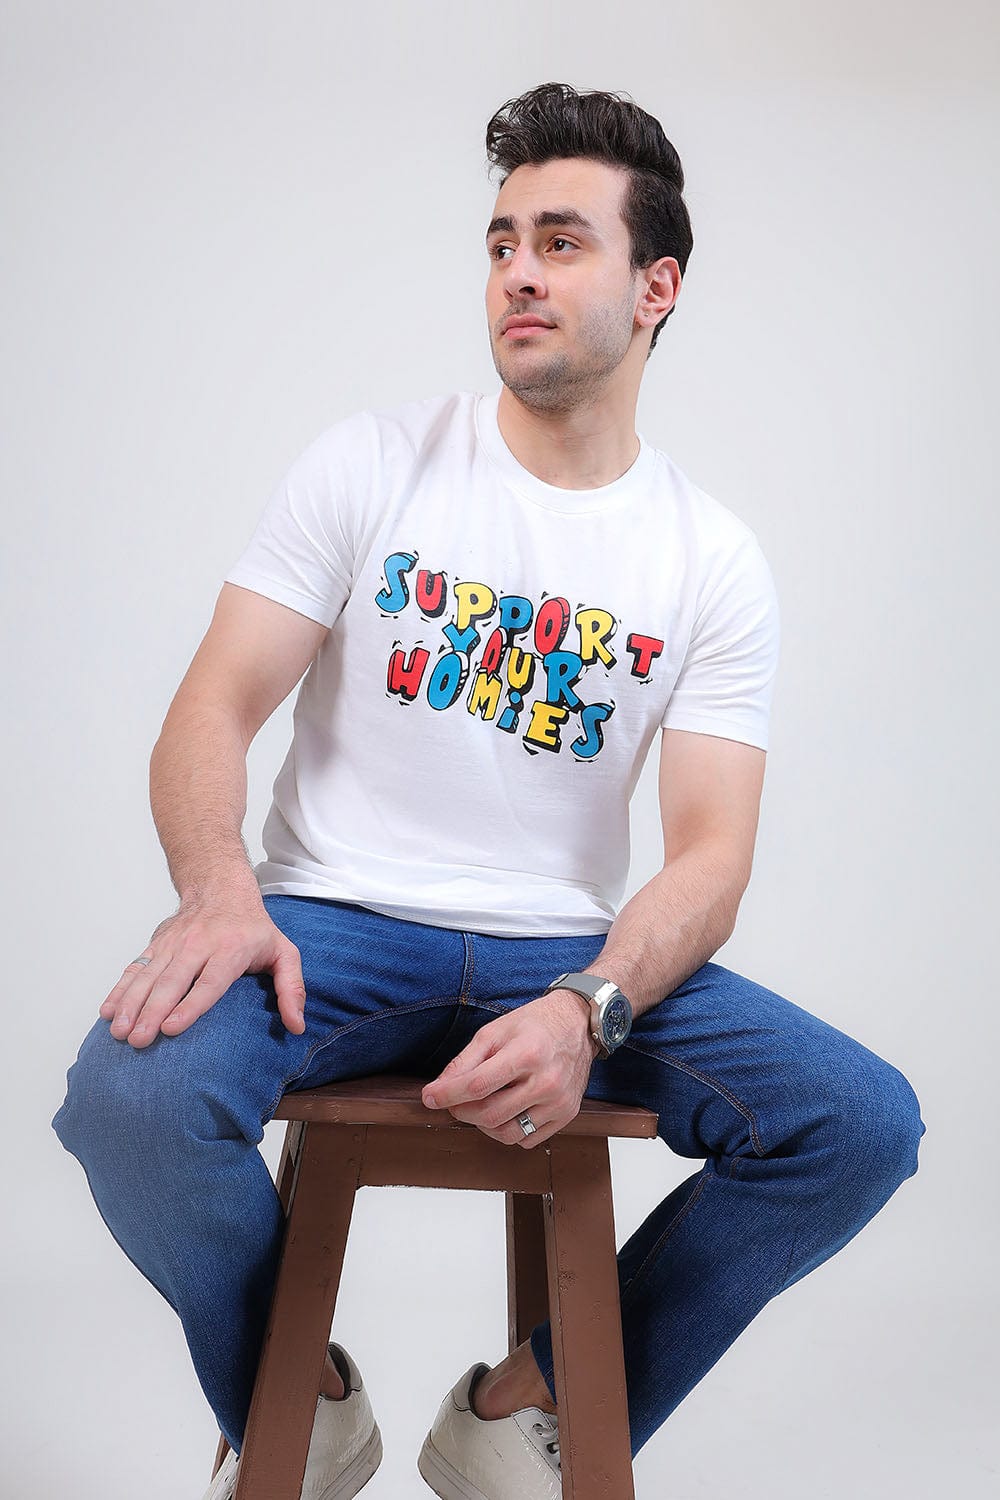 Hope Not Out by Shahid Afridi Men T-Shirt Homies Support White Tee for Men